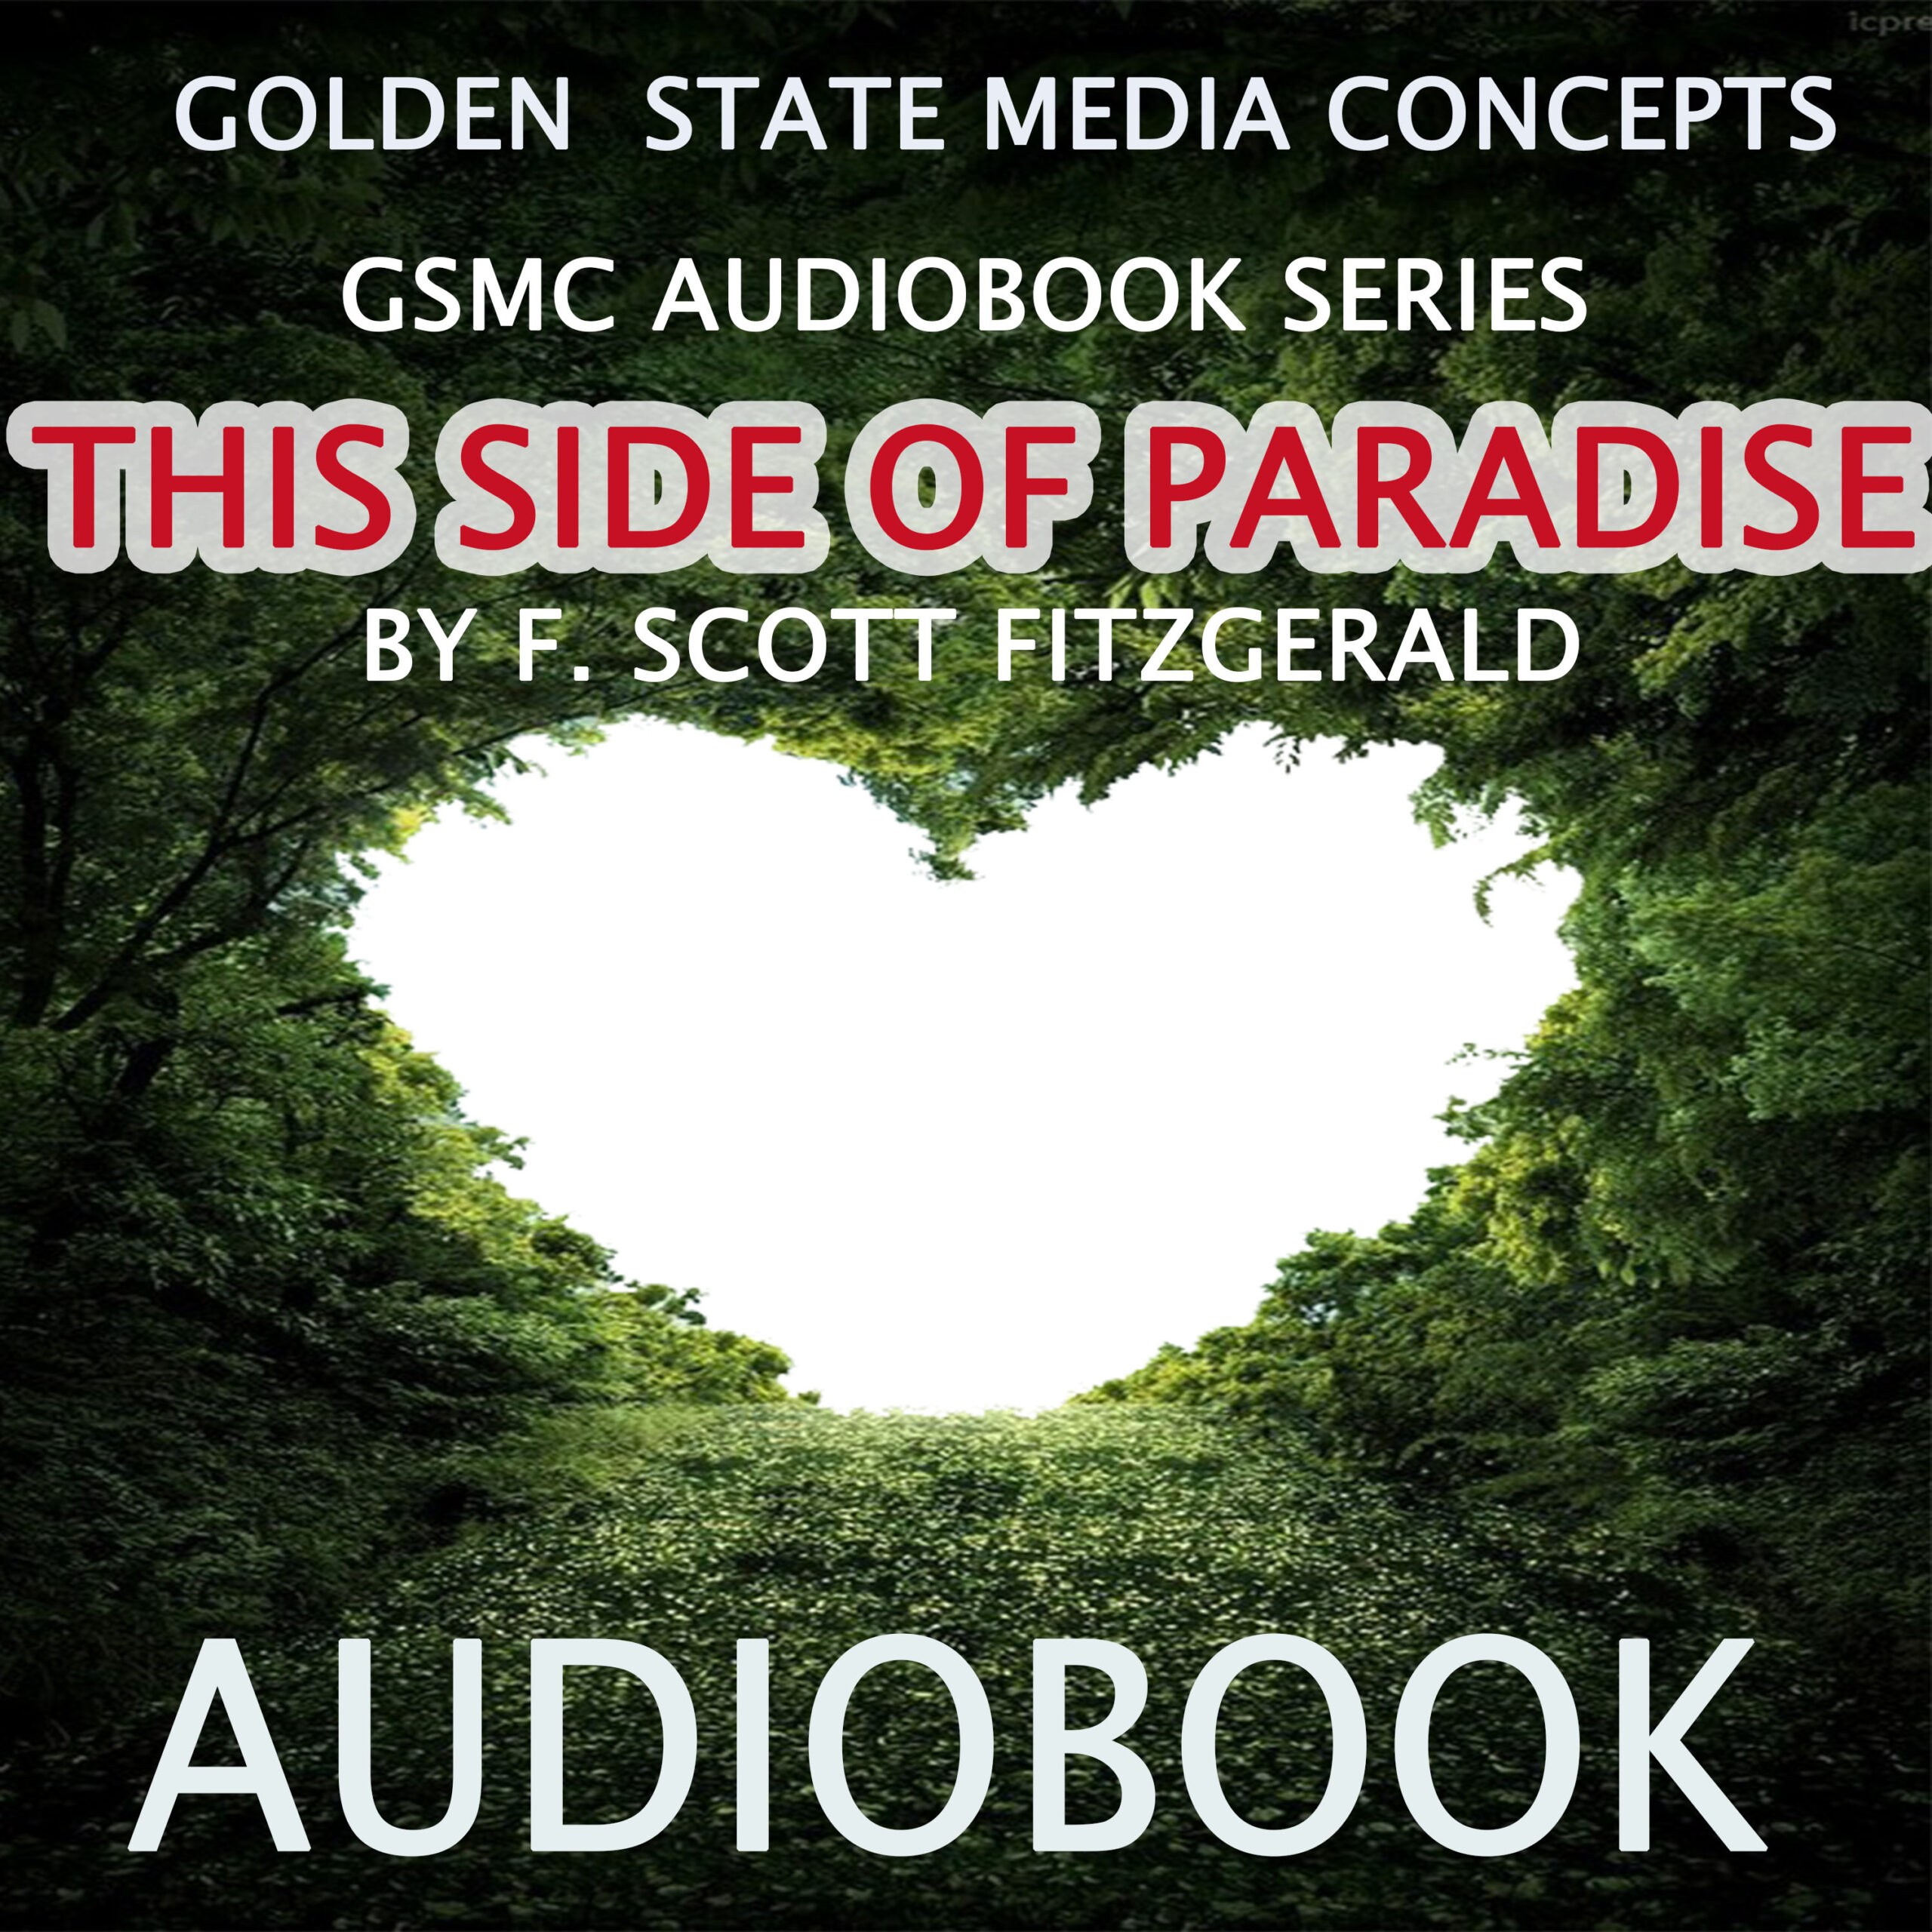 GSMC Audiobook Series: This Side of Paradise